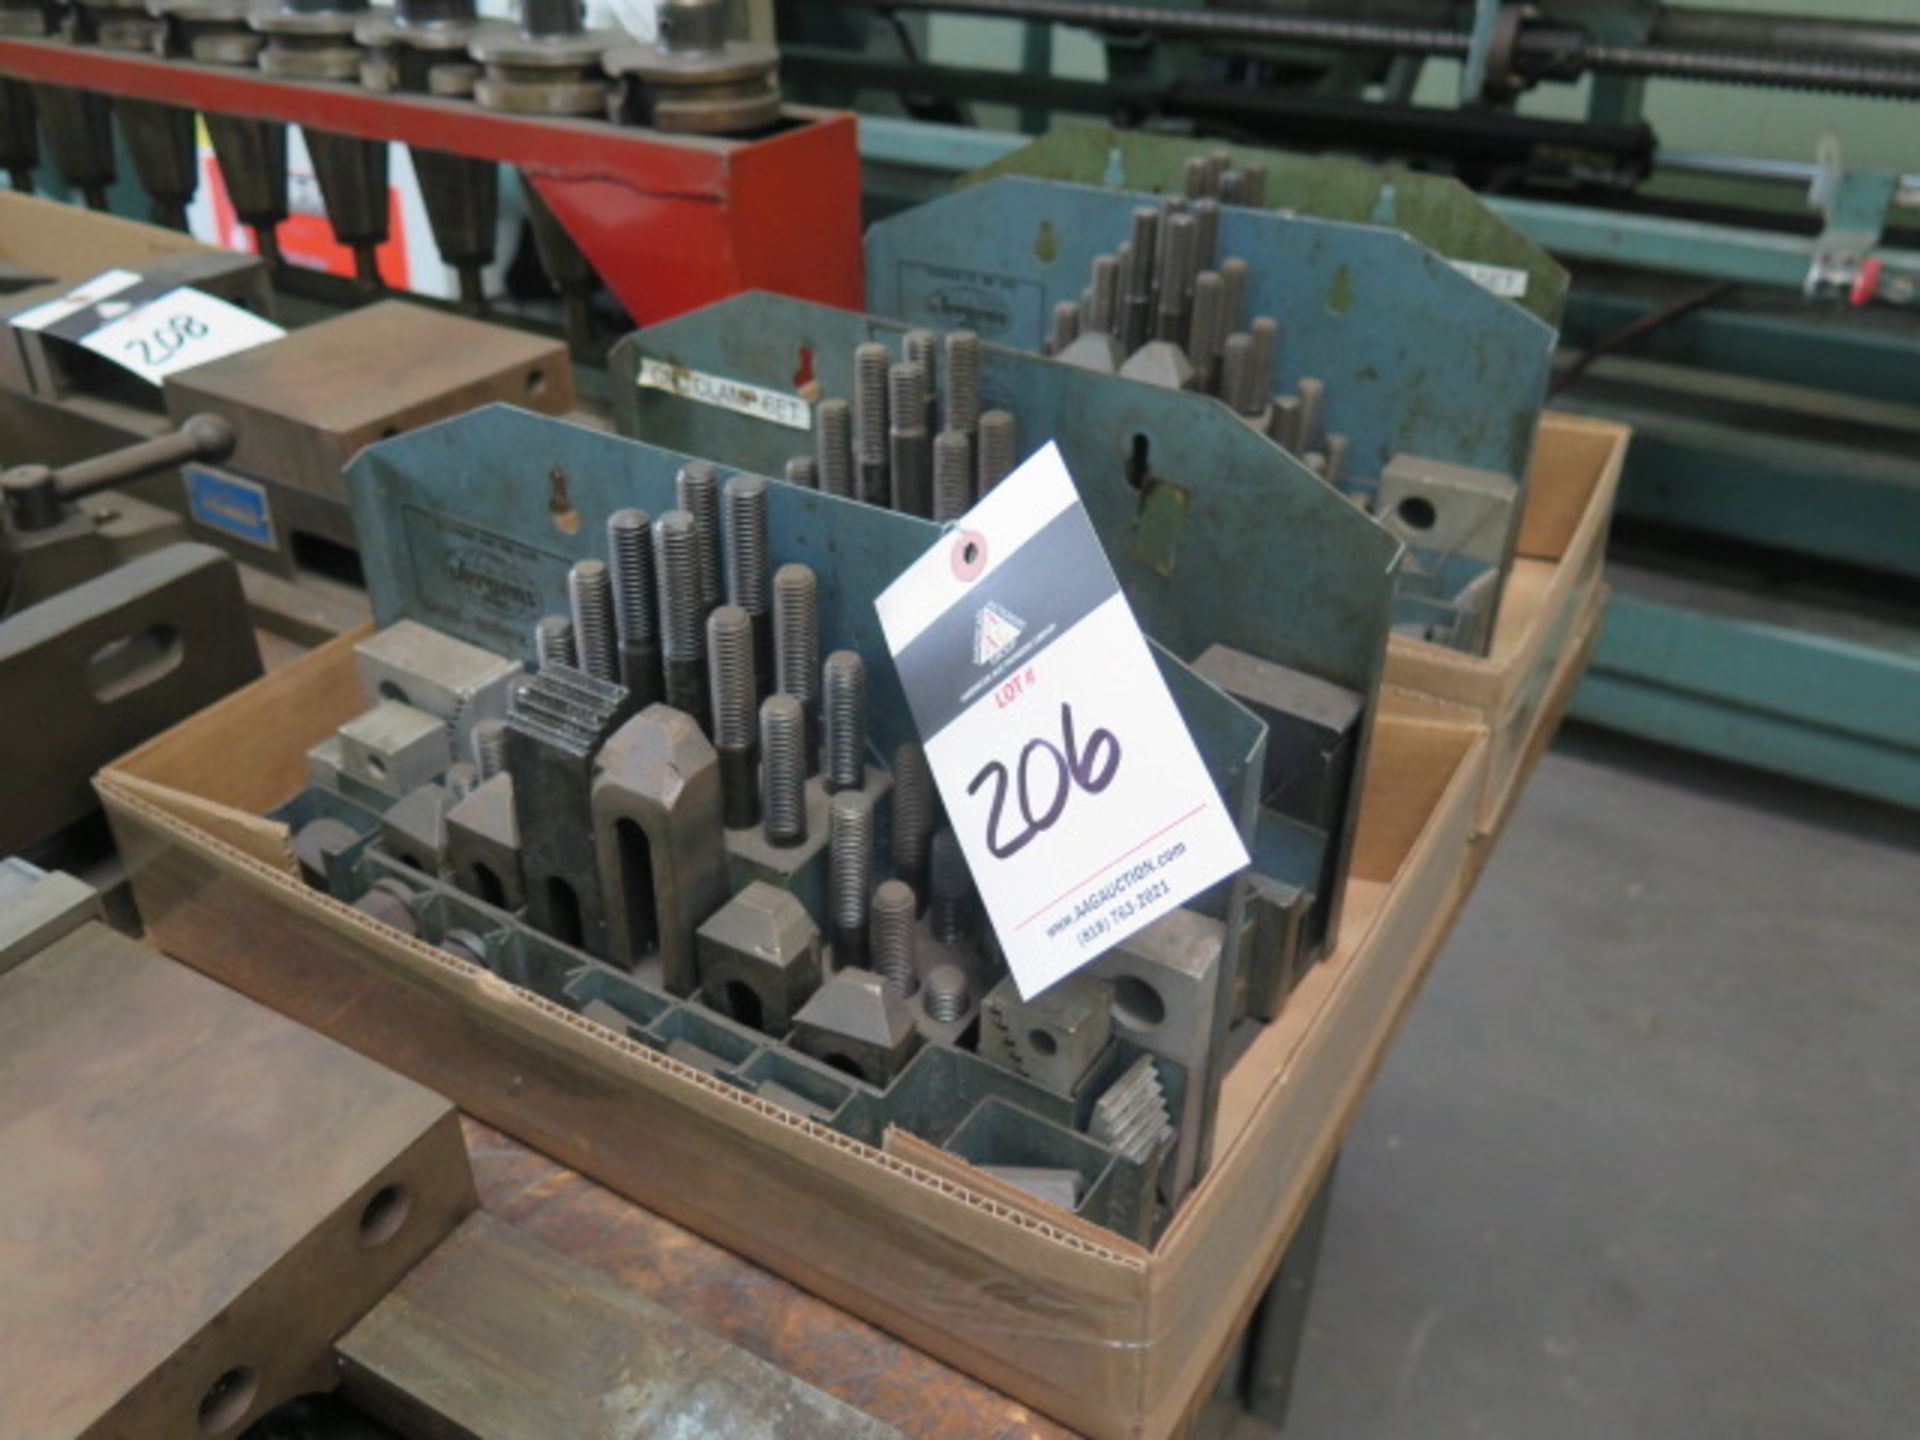 Mill Clamp Sets